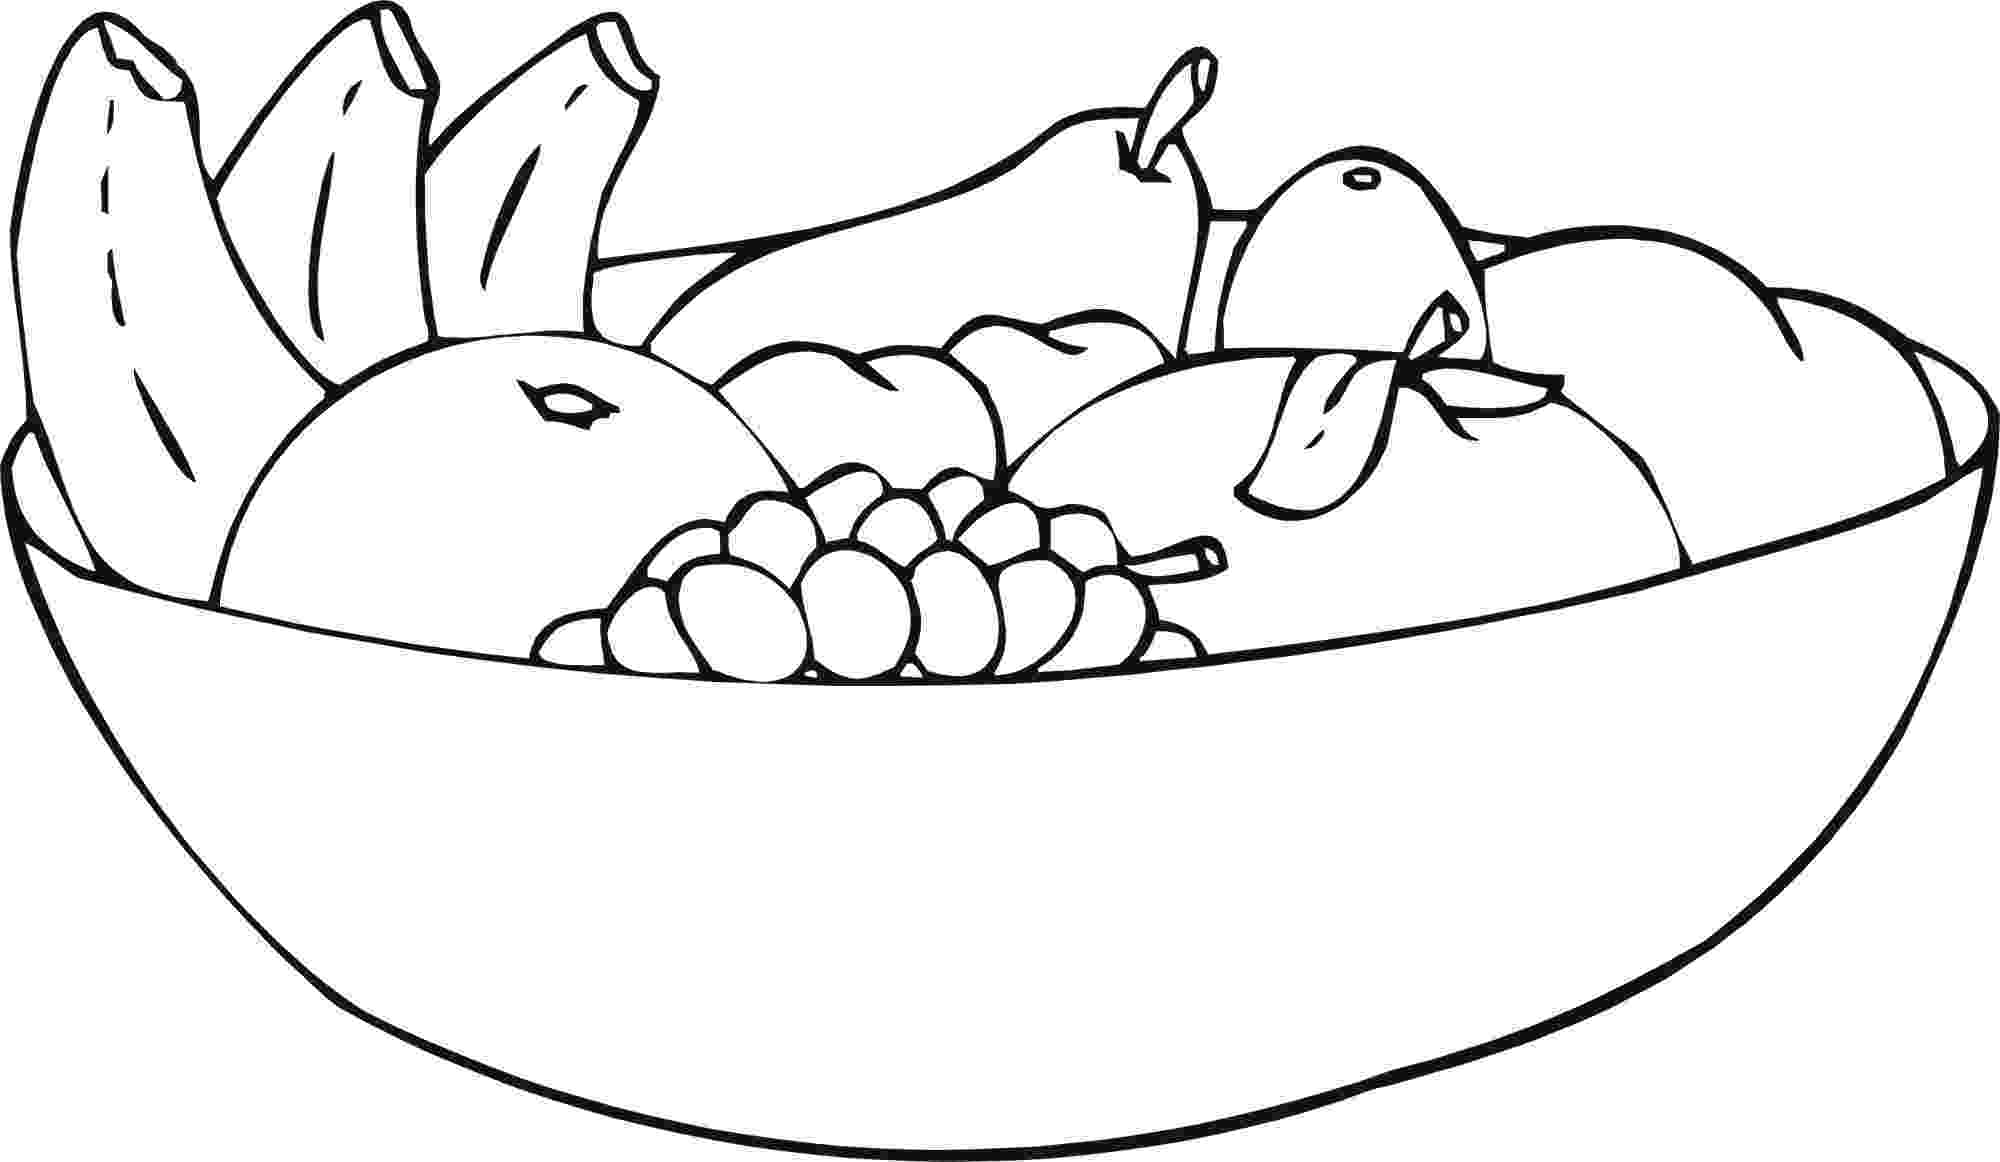 picture of fruits for colouring printable healthy eating chart coloring pages colouring picture fruits of for 